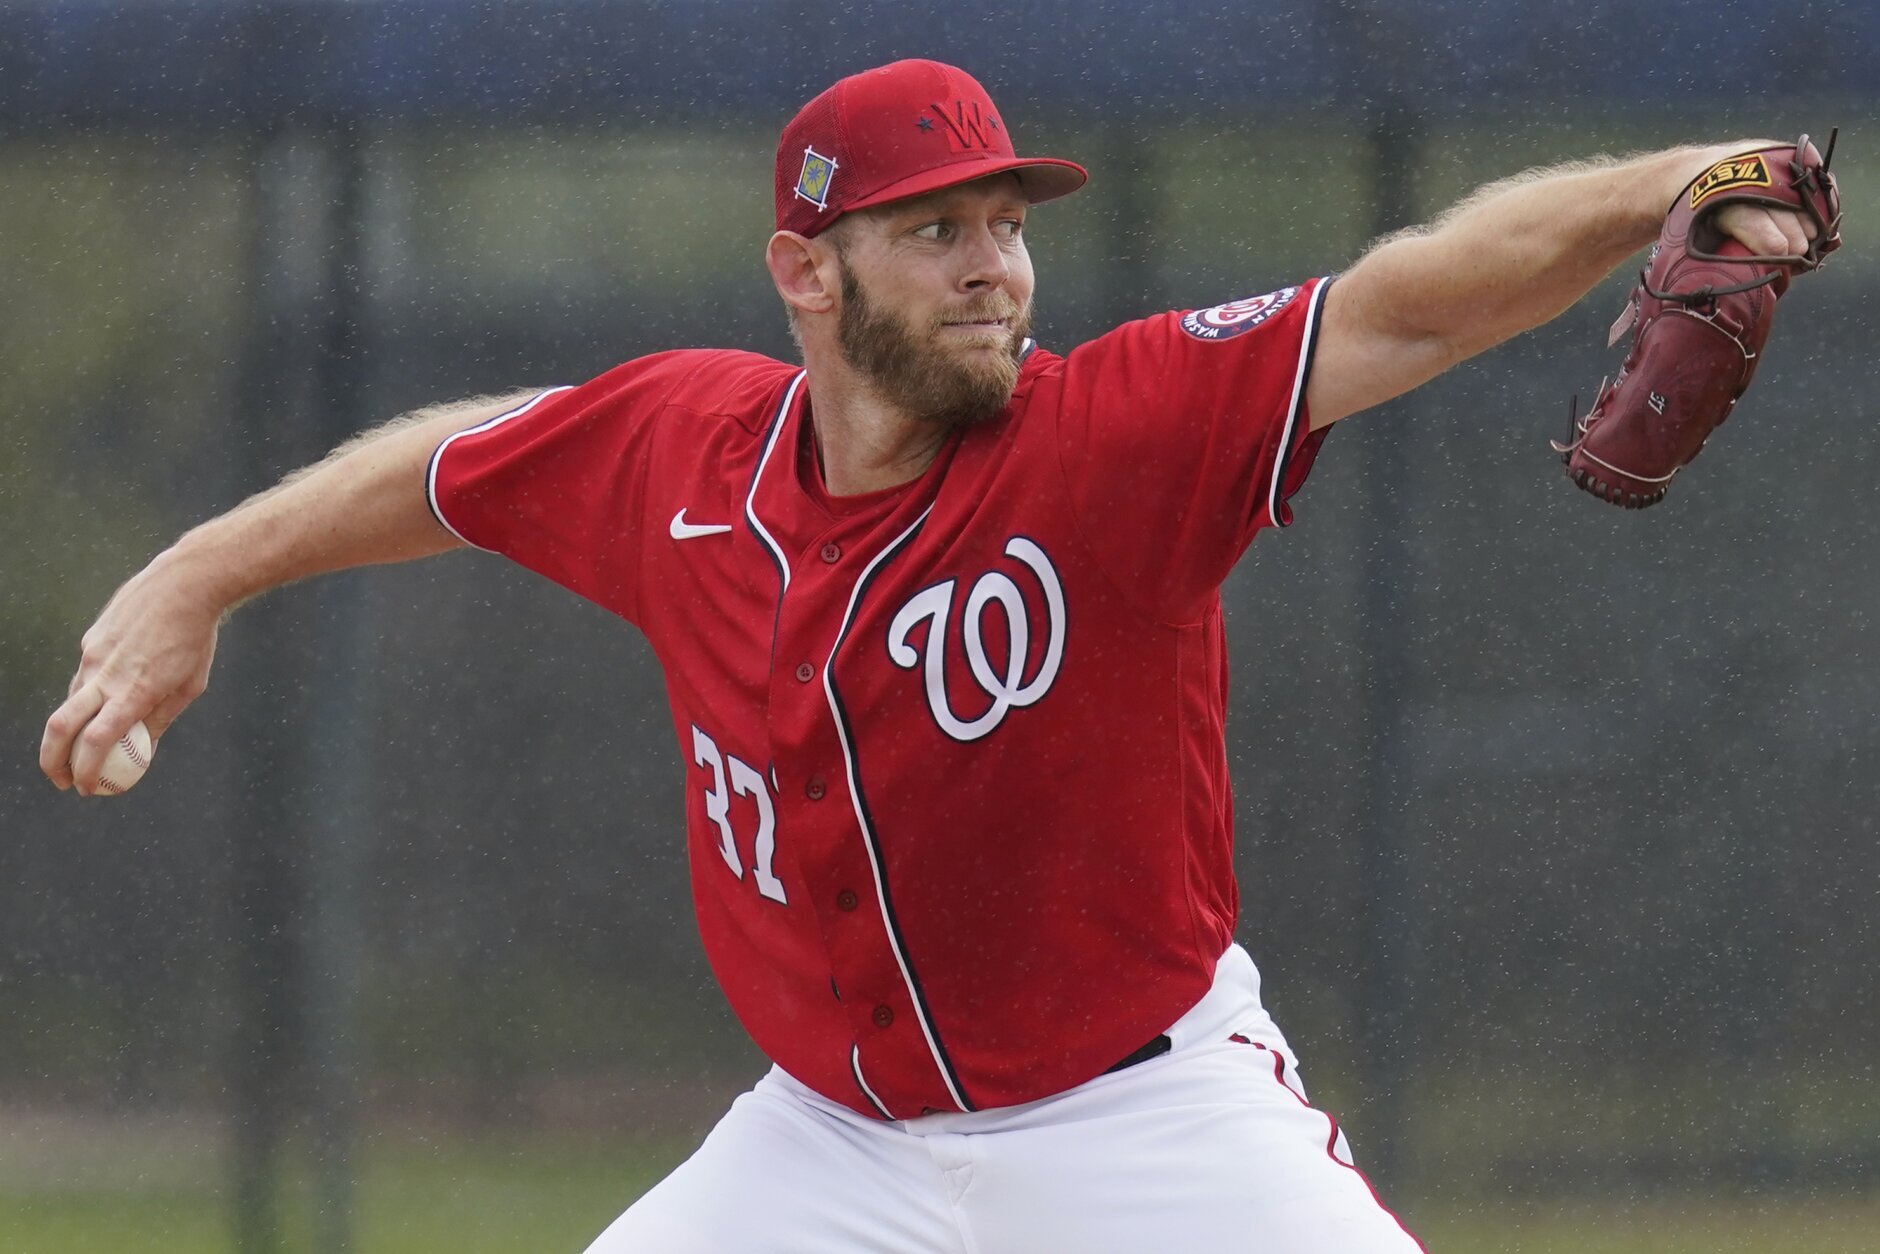 Stephen Strasburg Biography: Wife, Height, Contract, Age, Salary, Net Worth, Parents, Weight, Children